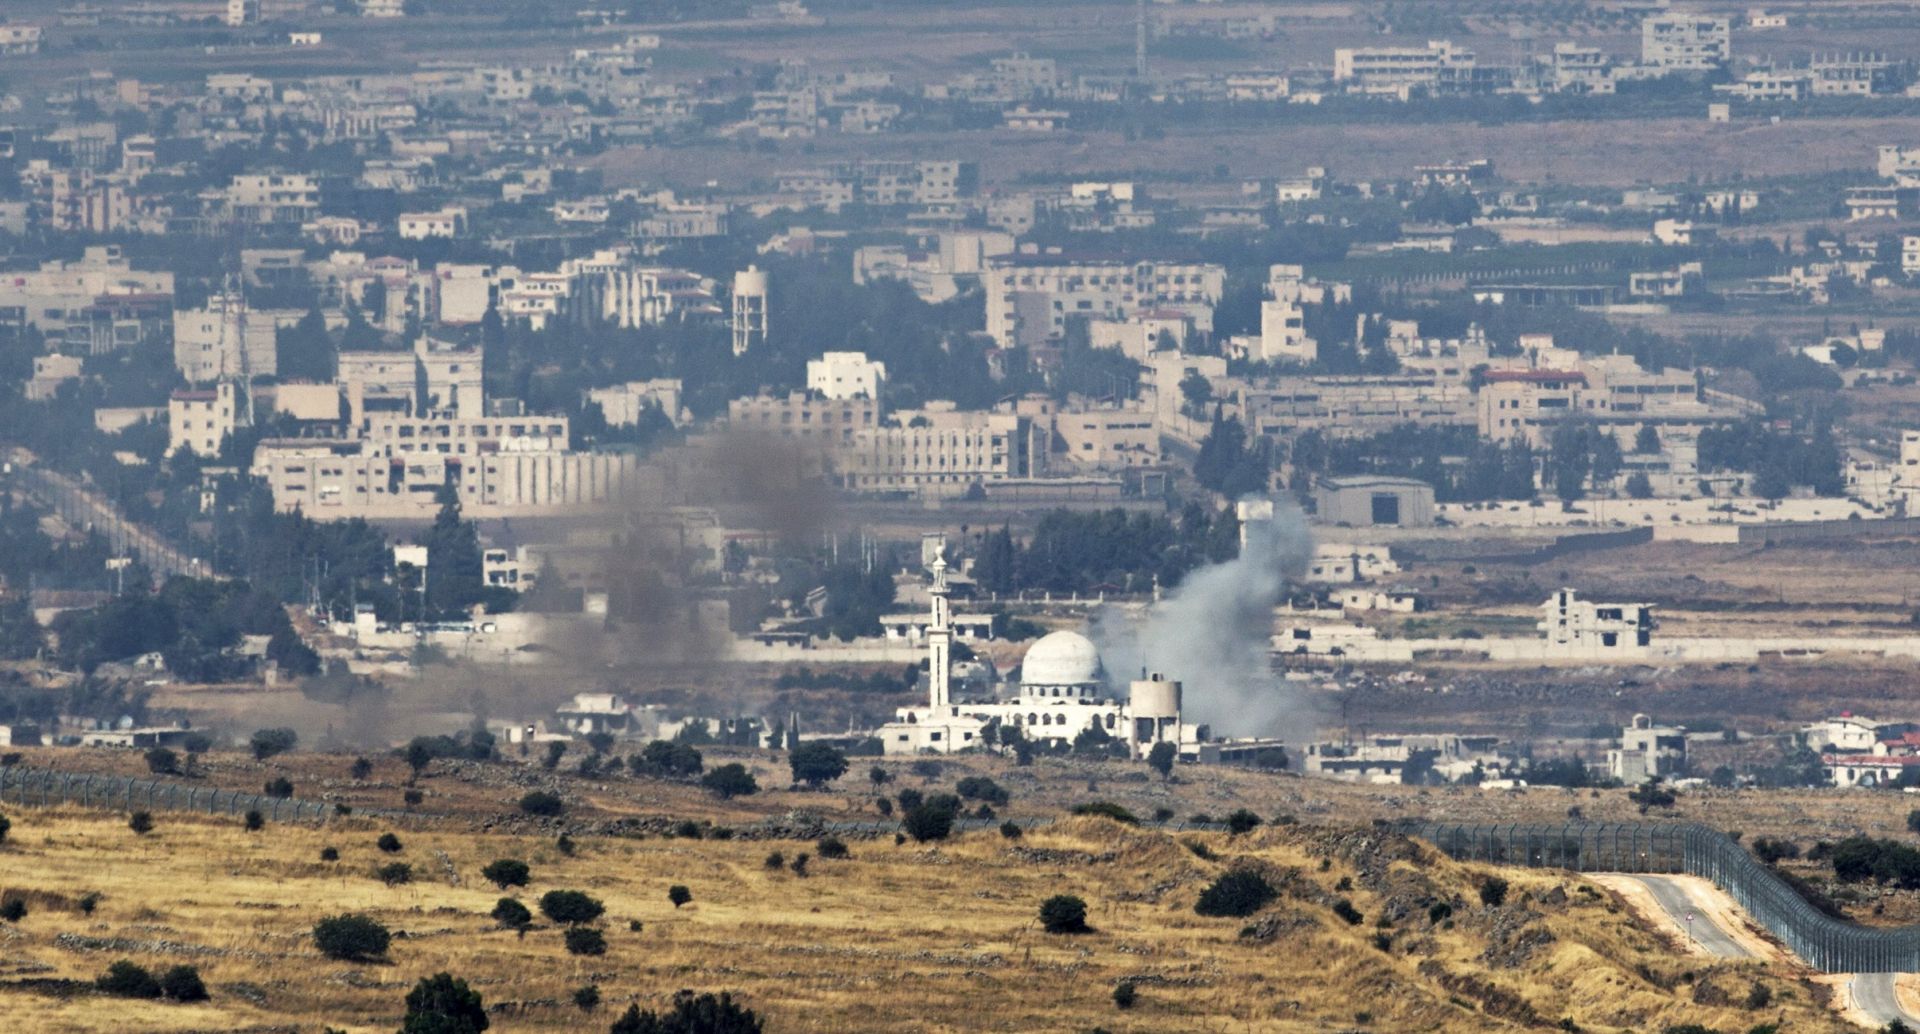 epa06047916 Smoke rise from Syrian village as a result of fighting near the city of Quneitra, in the Golan Heights, 24 June 2017. An Israeli army spokesman reported that in response to over ten projectiles launched from Syrian soil which hit Israel, Israeli aircraft targeted the position from which the launches originated and struck tanks belonging to the Syrian regime in the Northern Syrian Golan Heights. An official protest has been filed with United Nations Disengagement Observer Force (UNDOF).  EPA/ATEF SAFADI